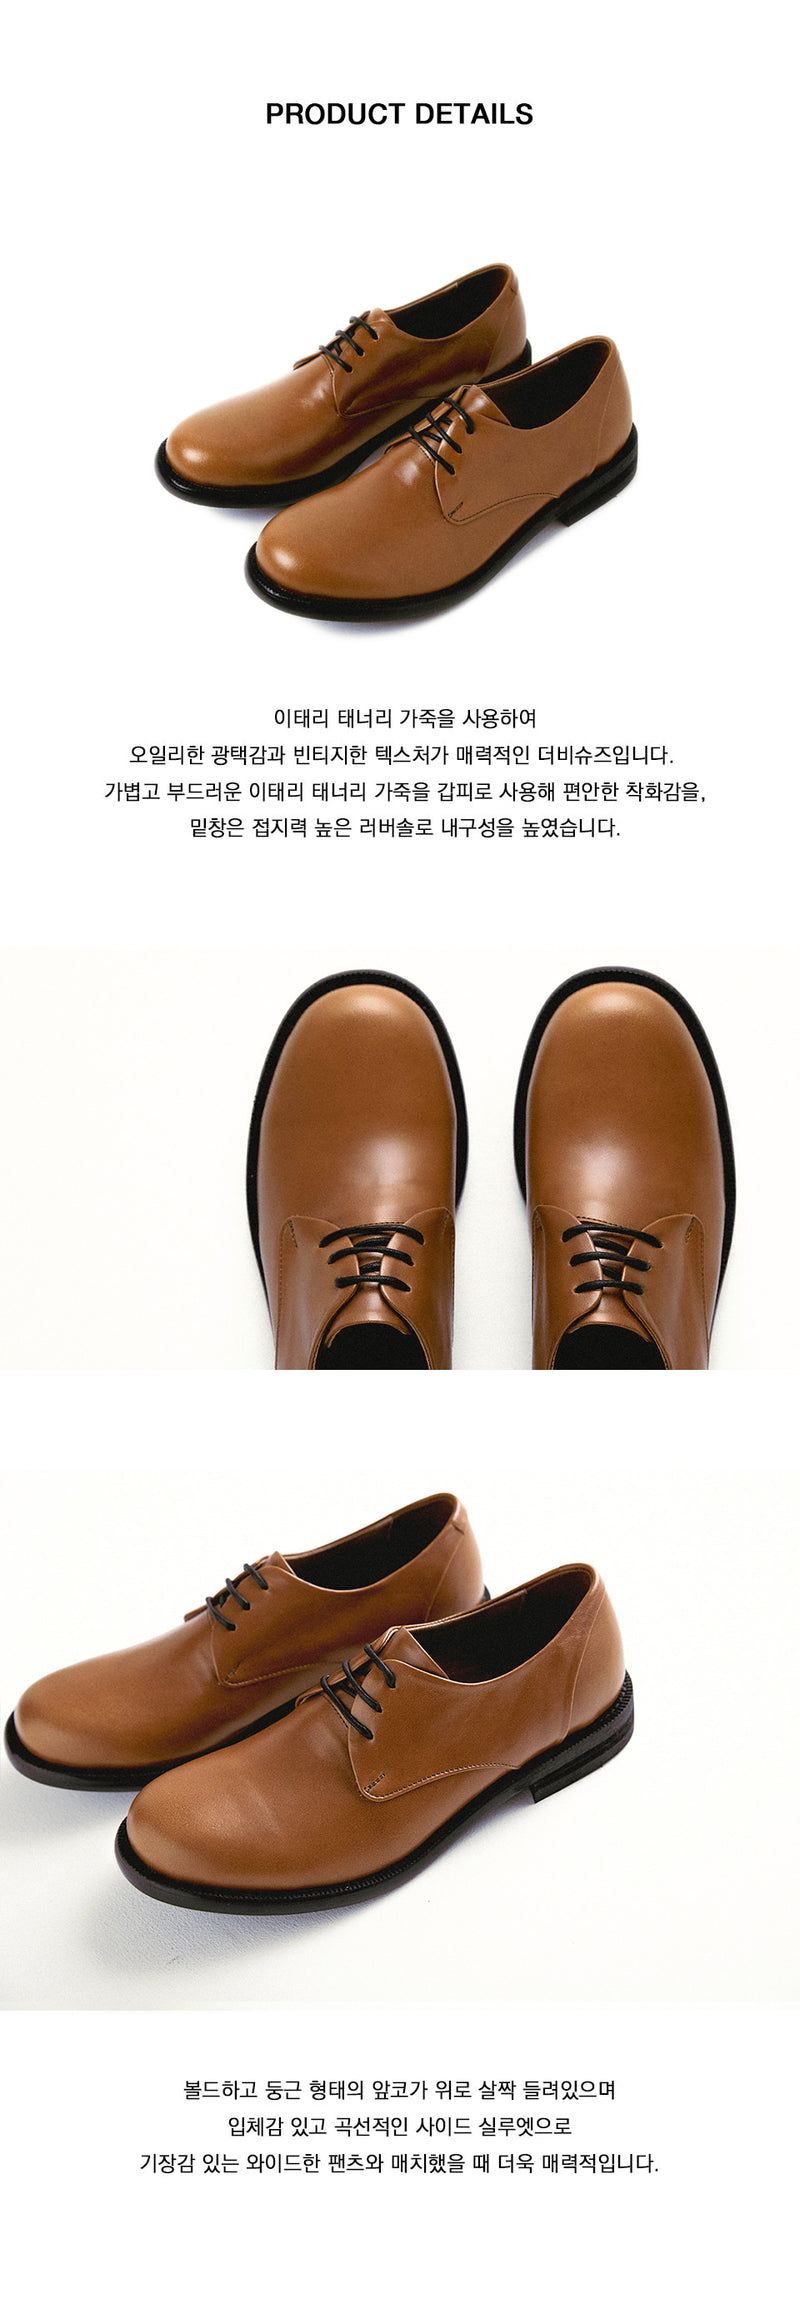 BREAD LEATHER DERBY SHOES BROWN